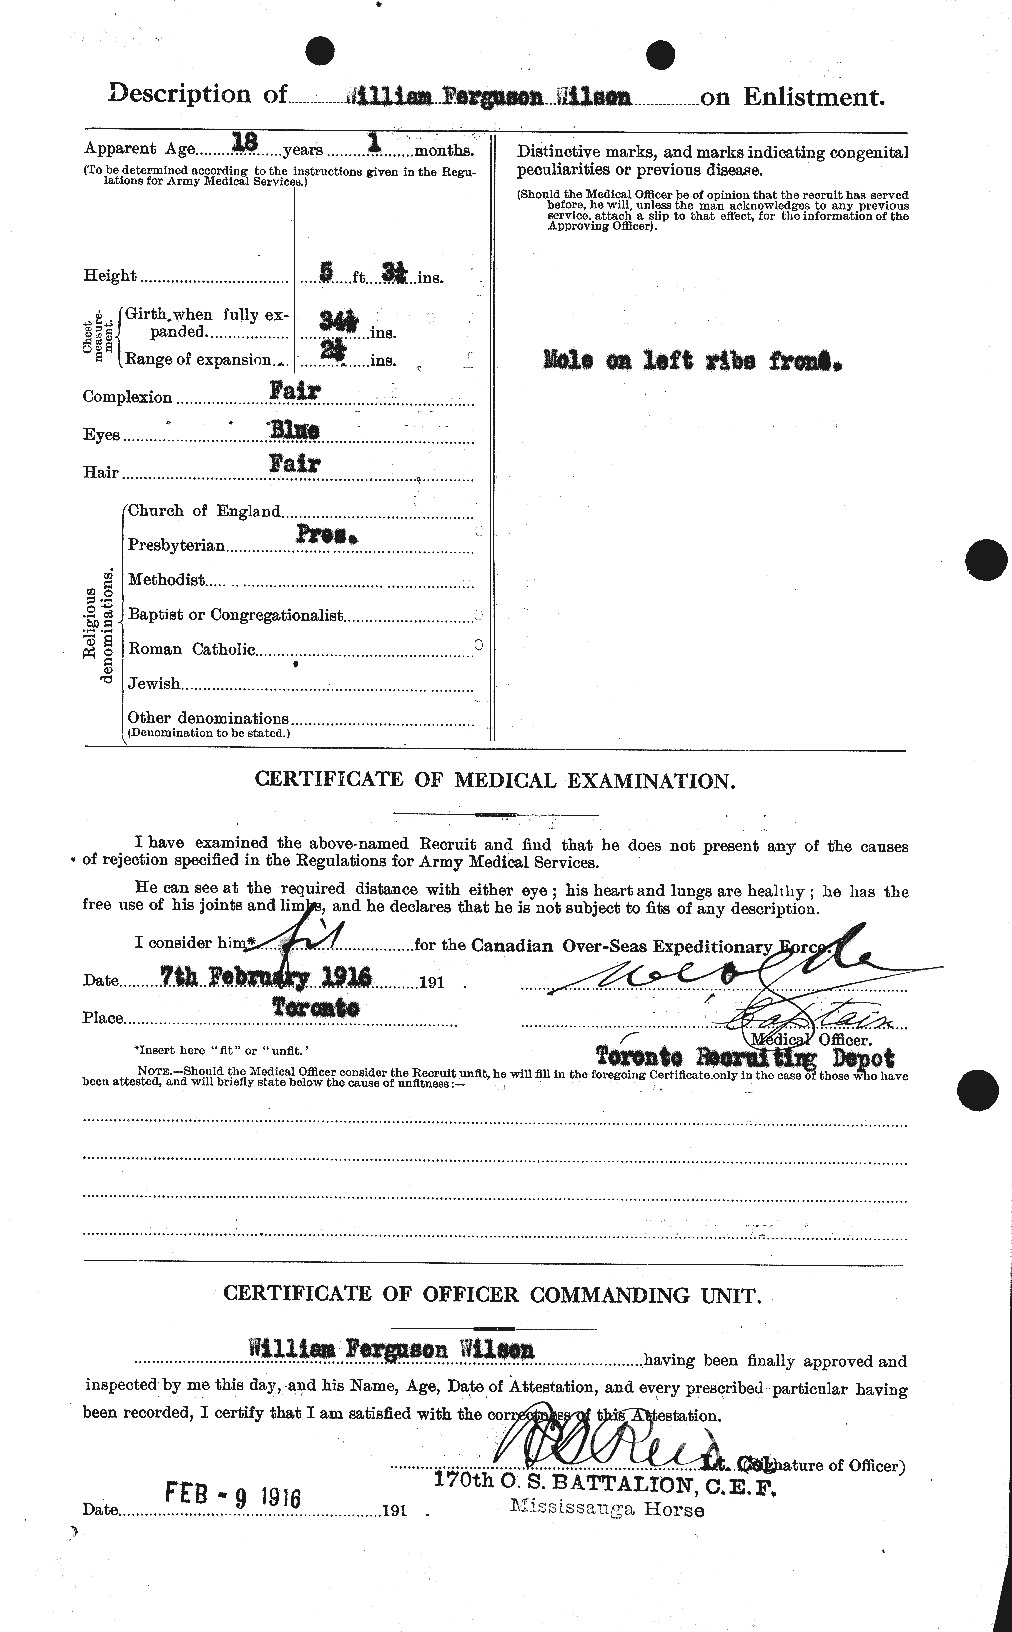 Personnel Records of the First World War - CEF 681987b